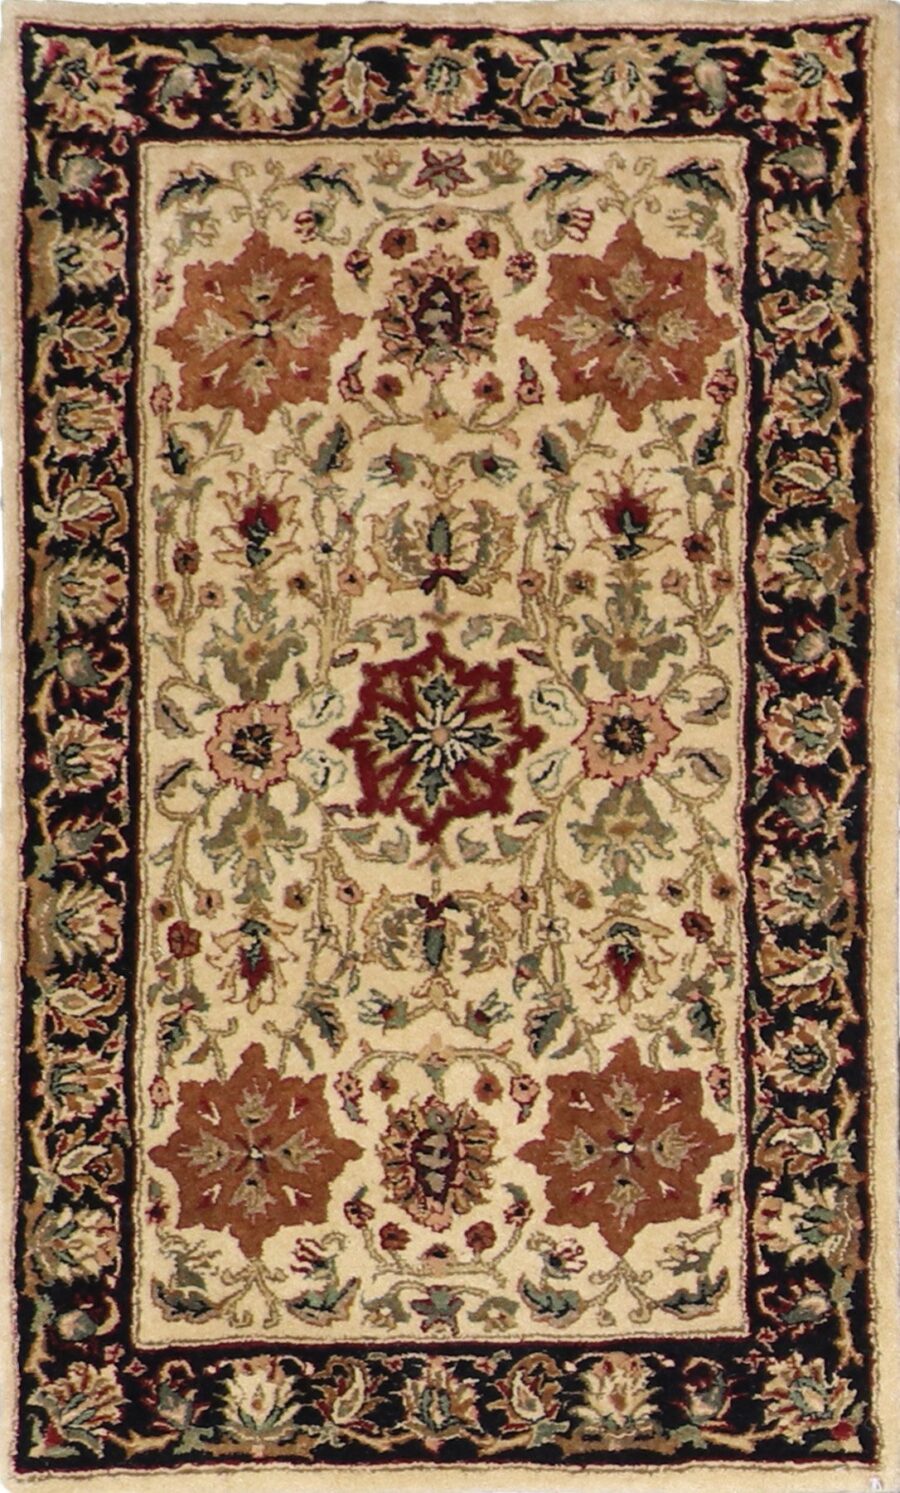 3’1”x5’1” Traditional Tan Wool Hand-Tufted Rug - Direct Rug Import | Rugs in Chicago, Indiana,South Bend,Granger